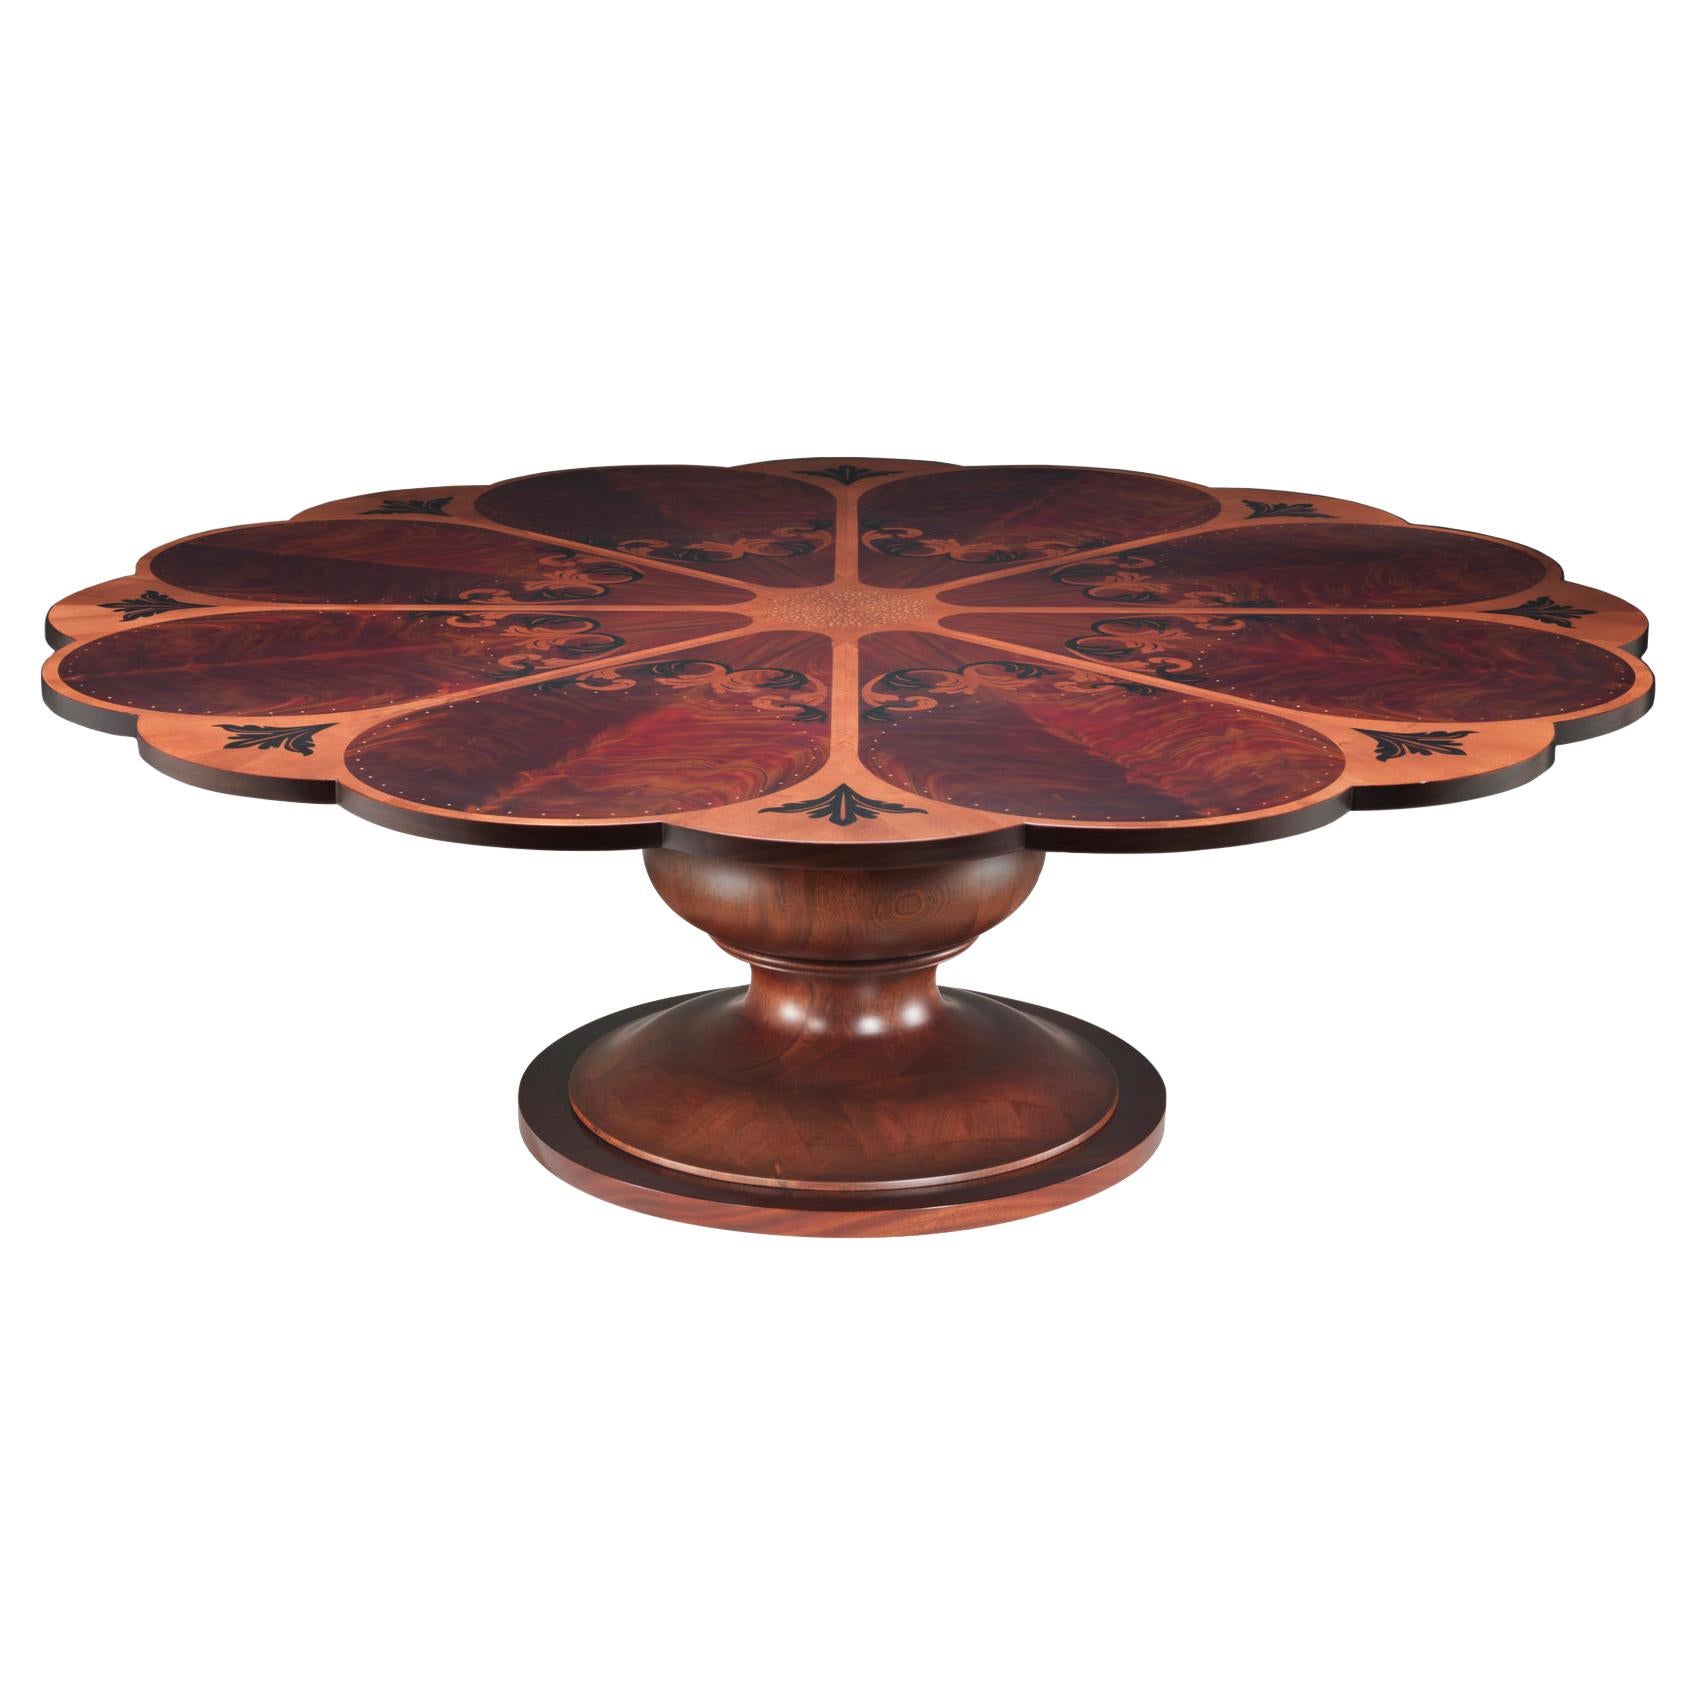 ENGLISH ROSE Round Inlayed Dining Table in Solid Mahogany Wood and Brass For Sale